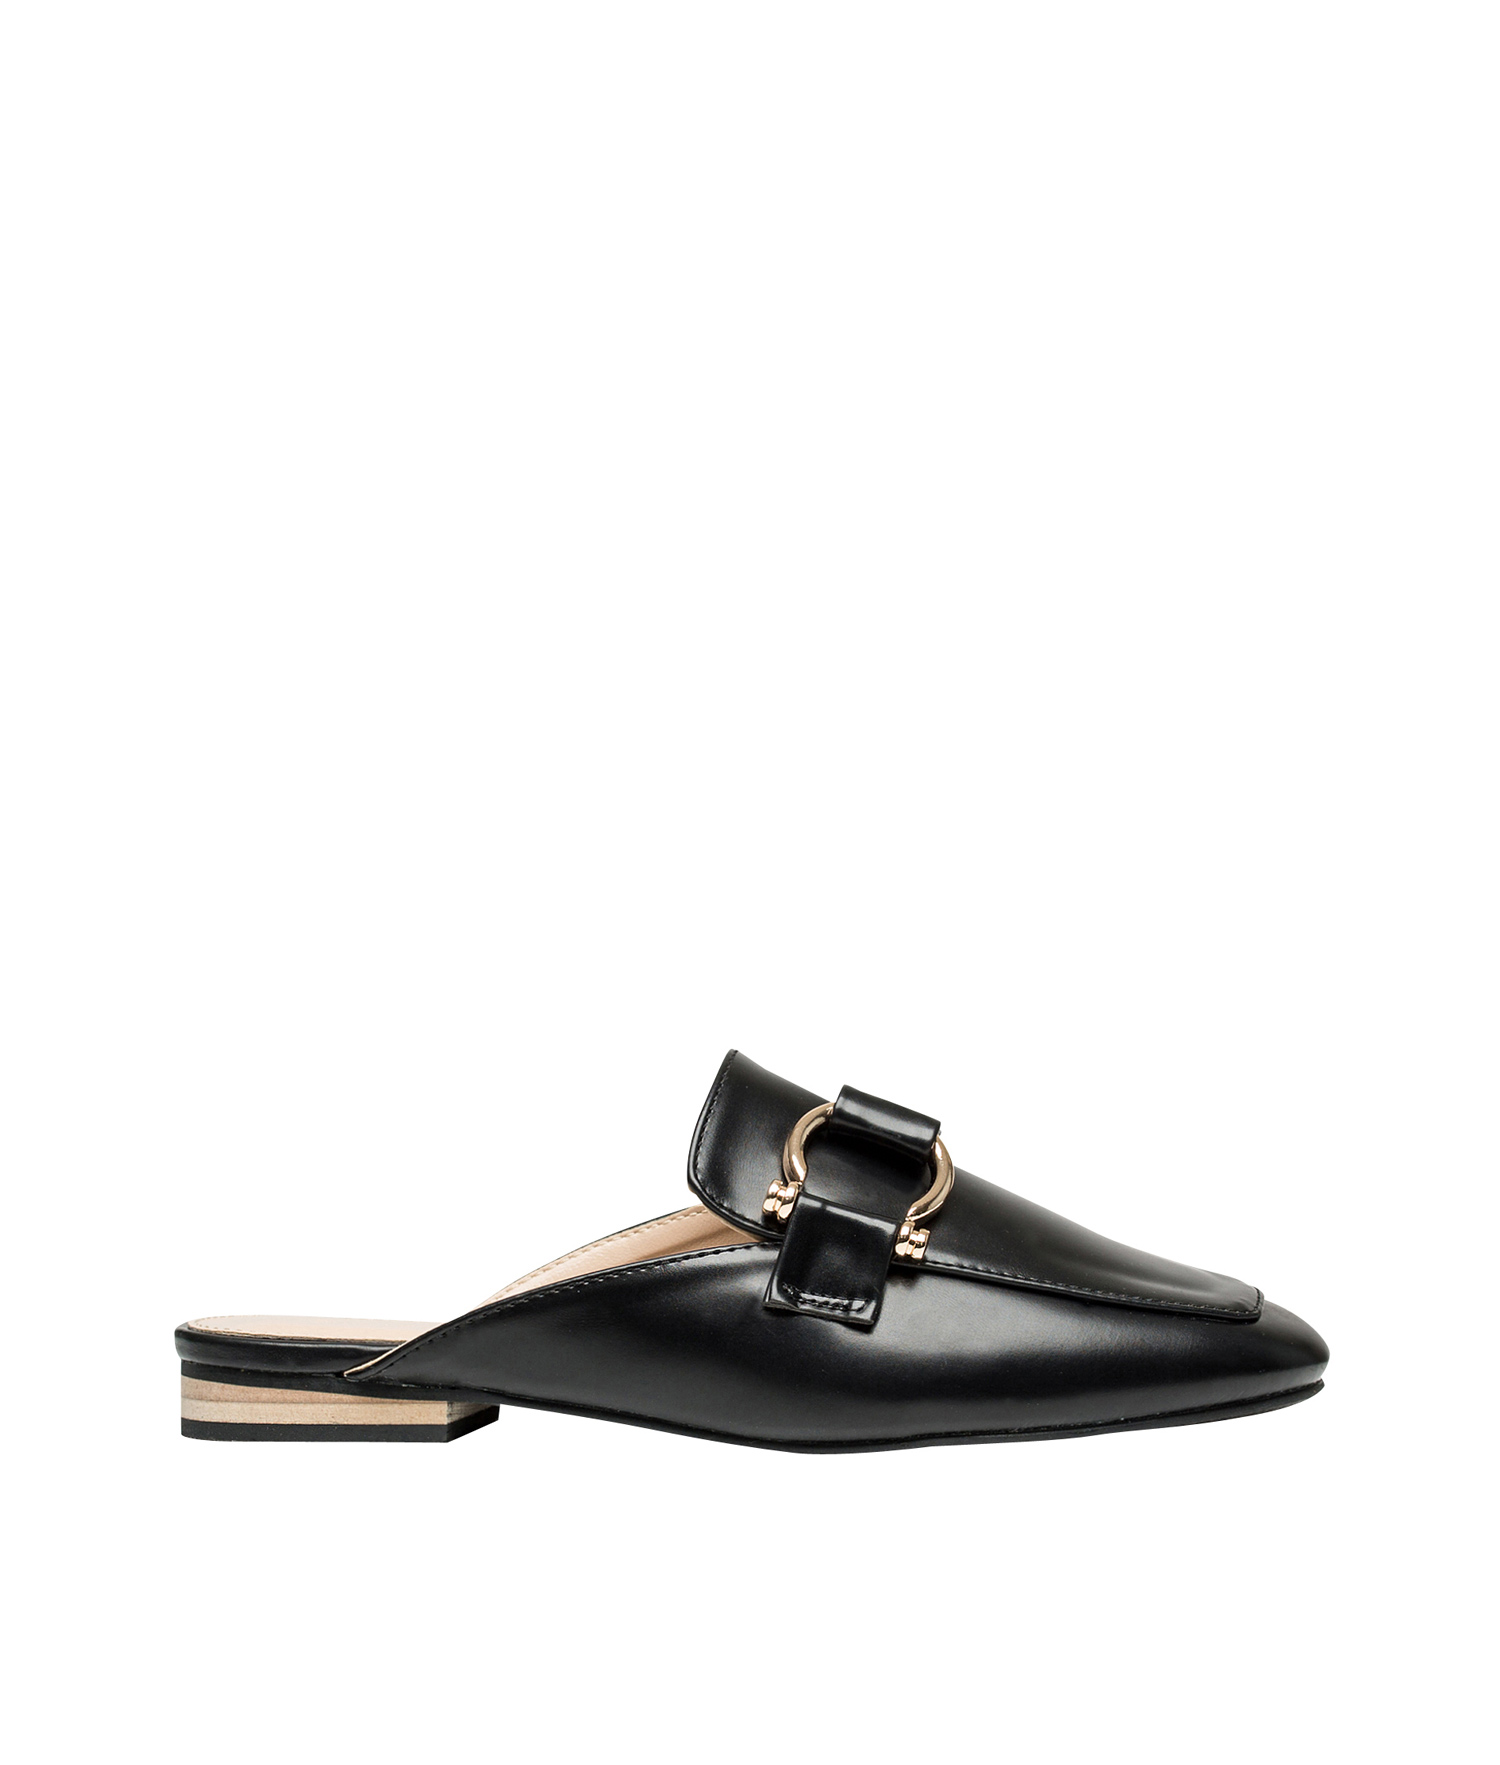 Classic Penny Loafers - annakastleshoes.com